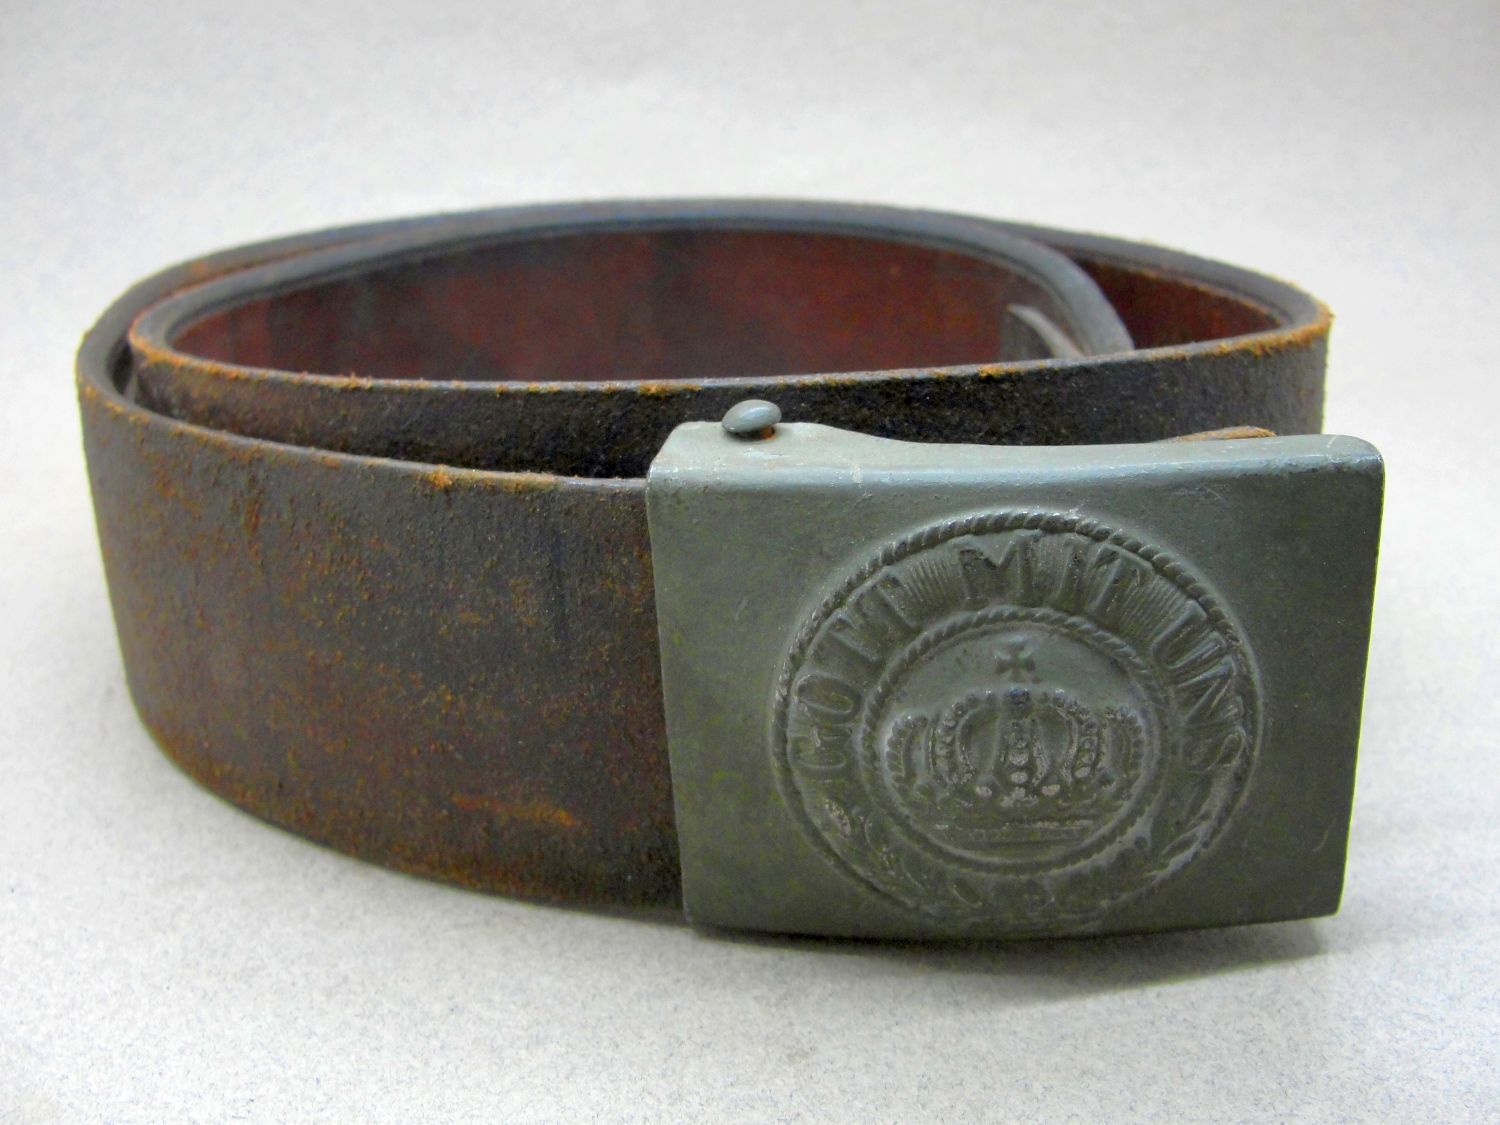 German WW1 Army Belt and Buckle - Dated & Unit Marked - Original German ...